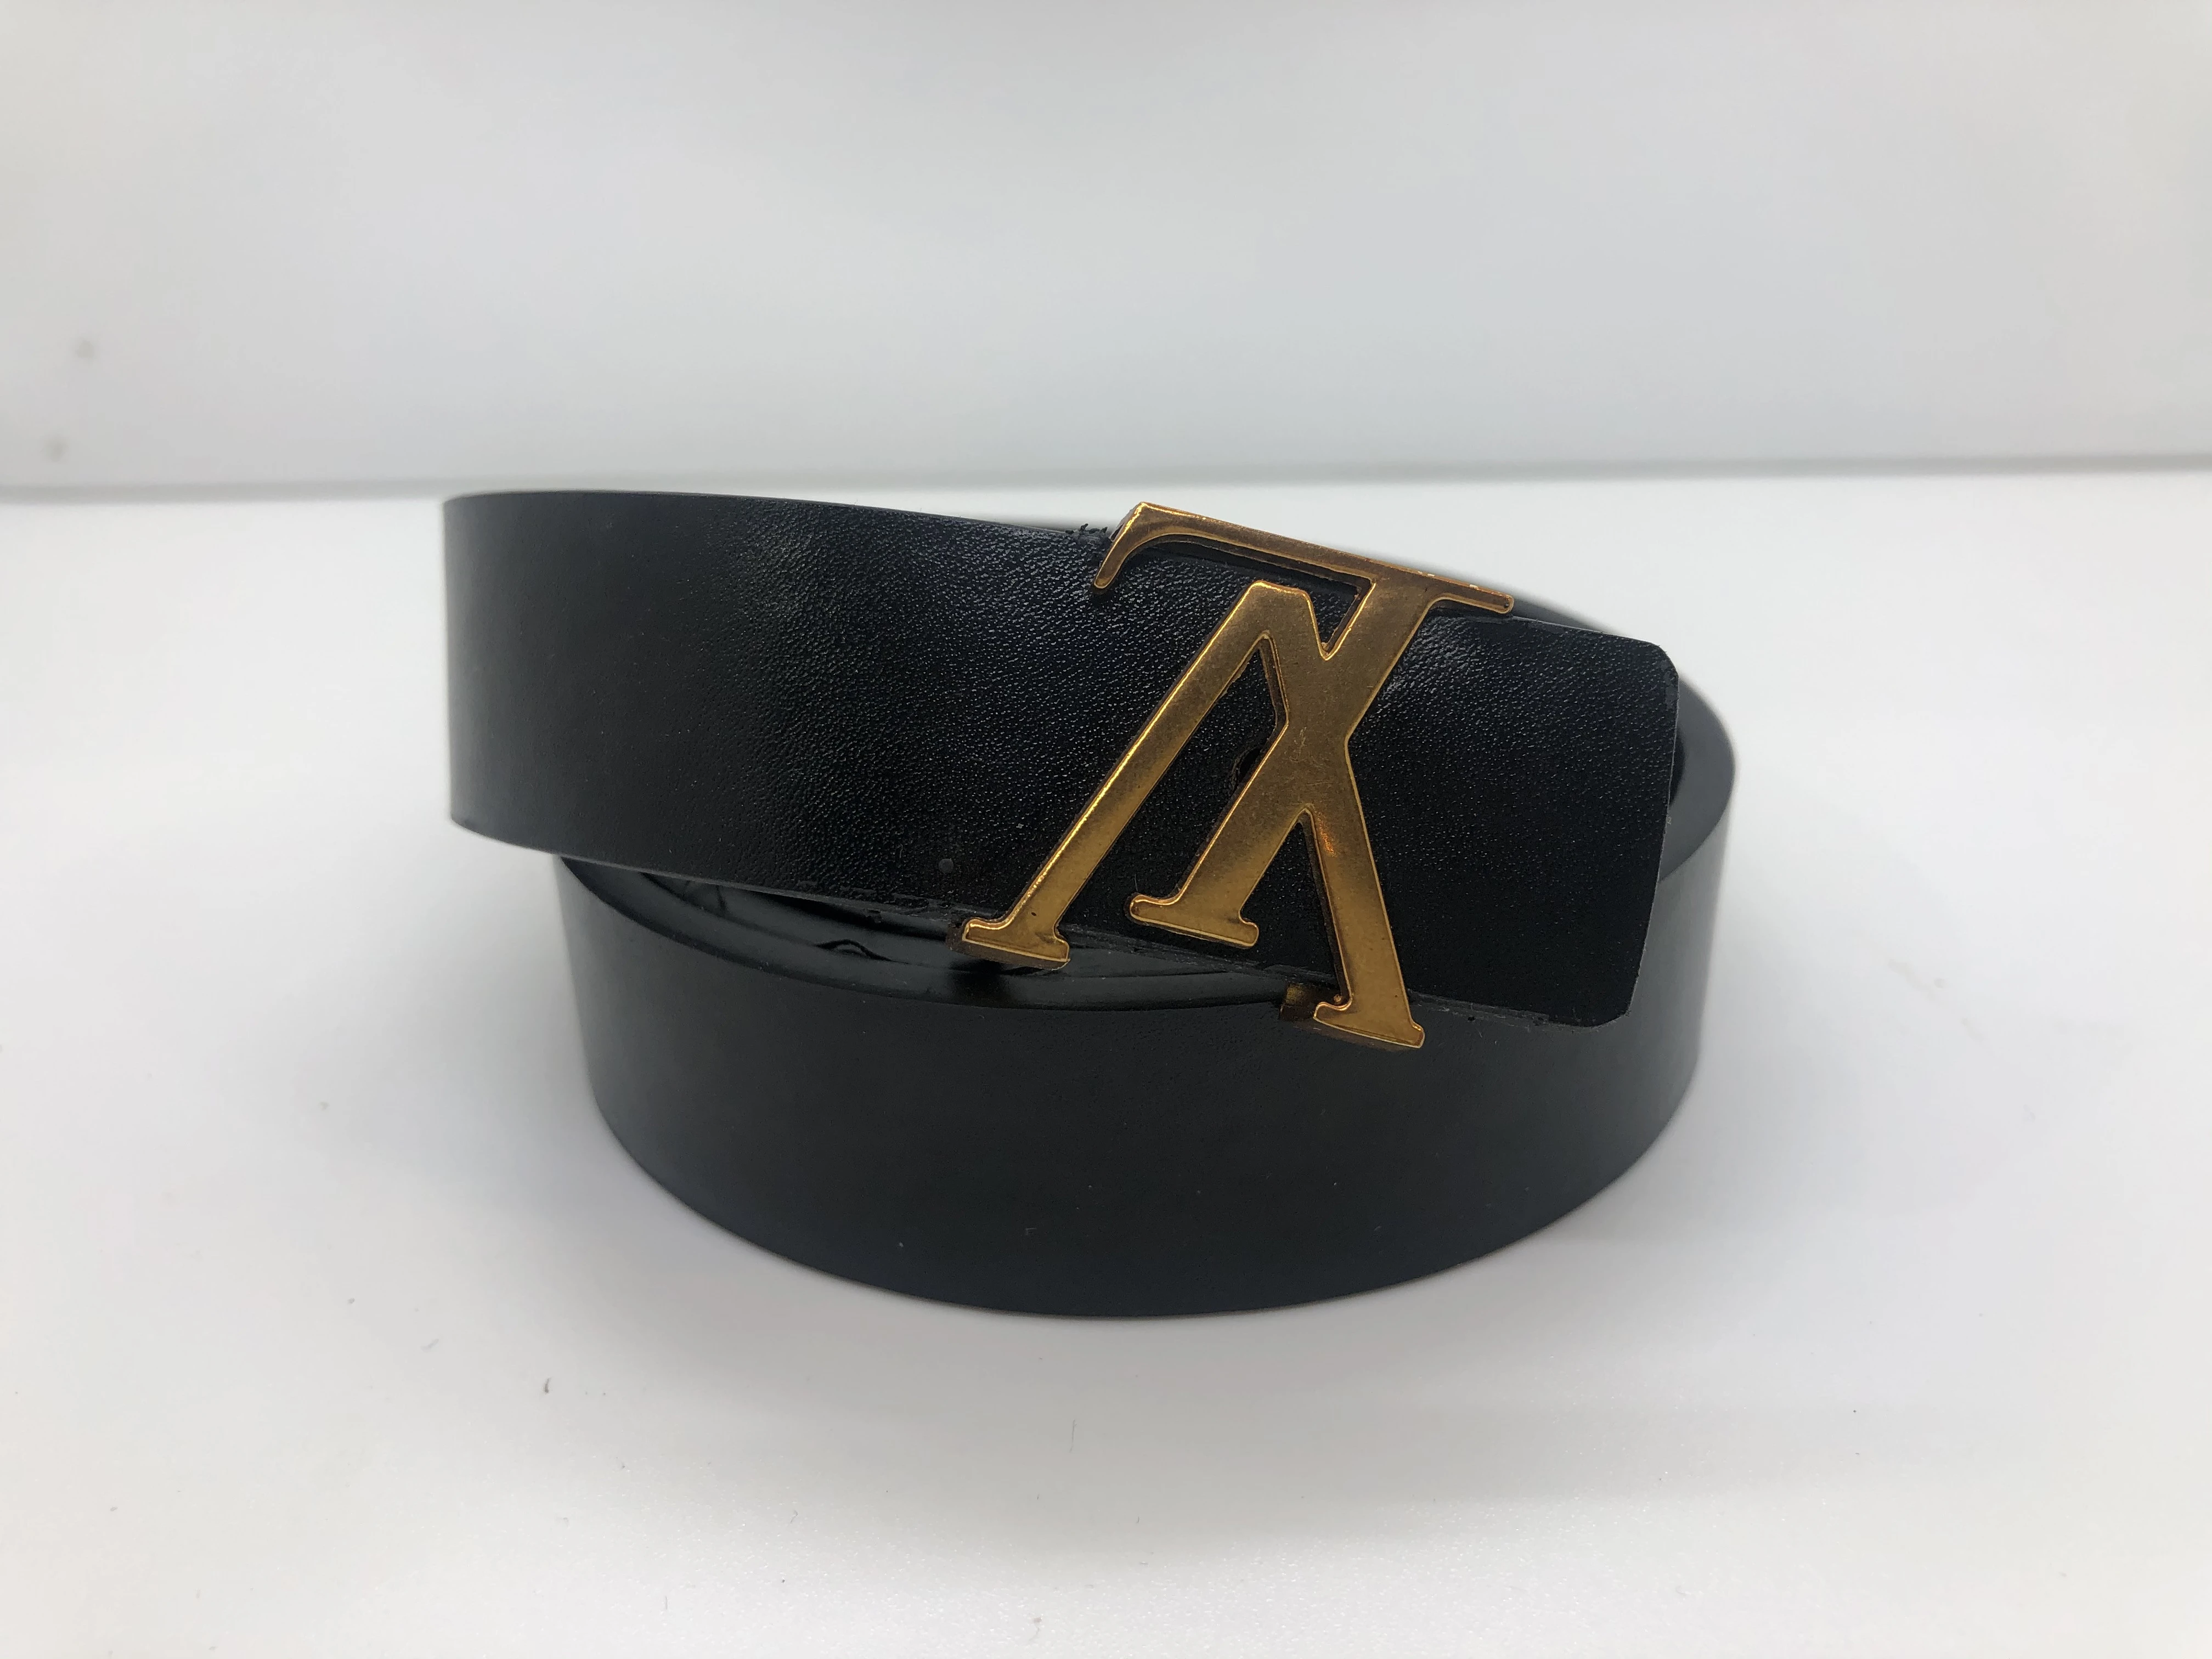 Louis Vuitton women's belt, black, golden buckle, with the brand's logo finishes